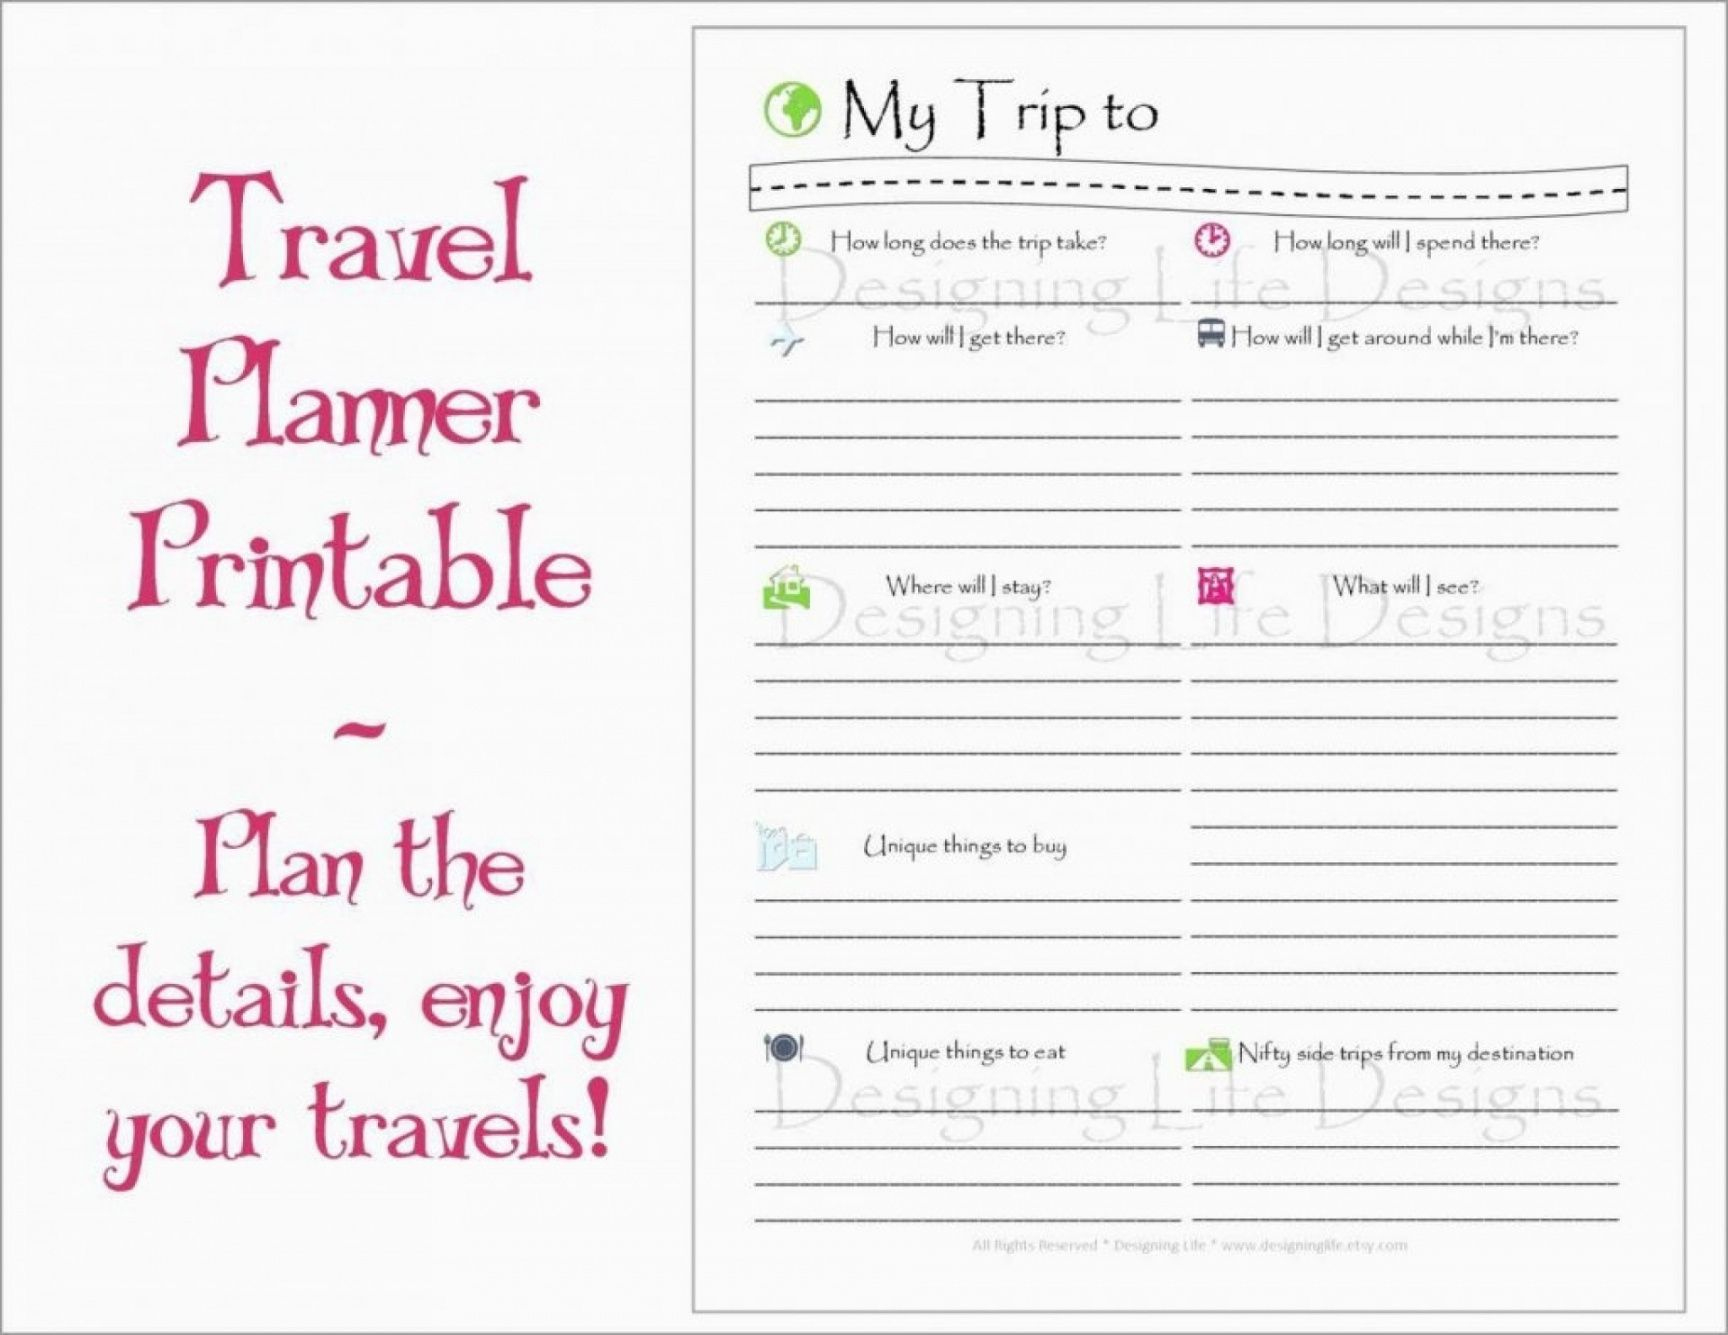 Awesome Professional Travel Itinerary Template